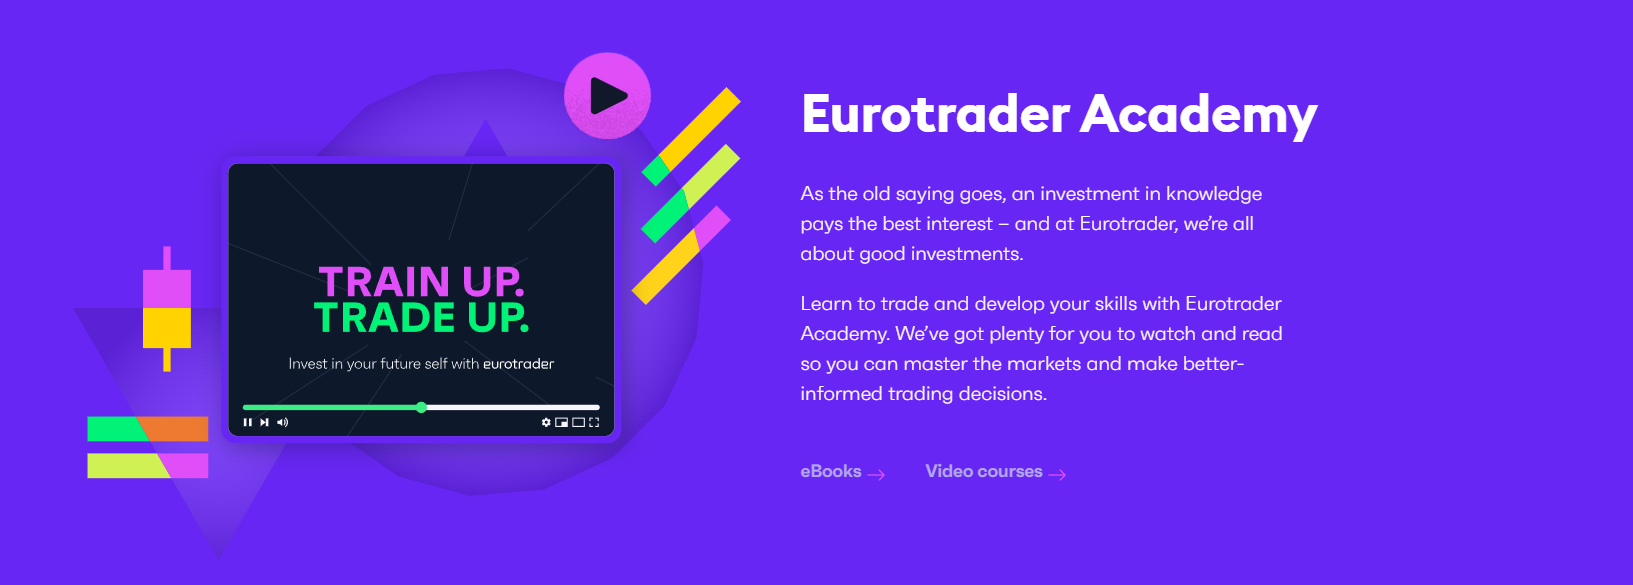 Making Money with Eurotrader  